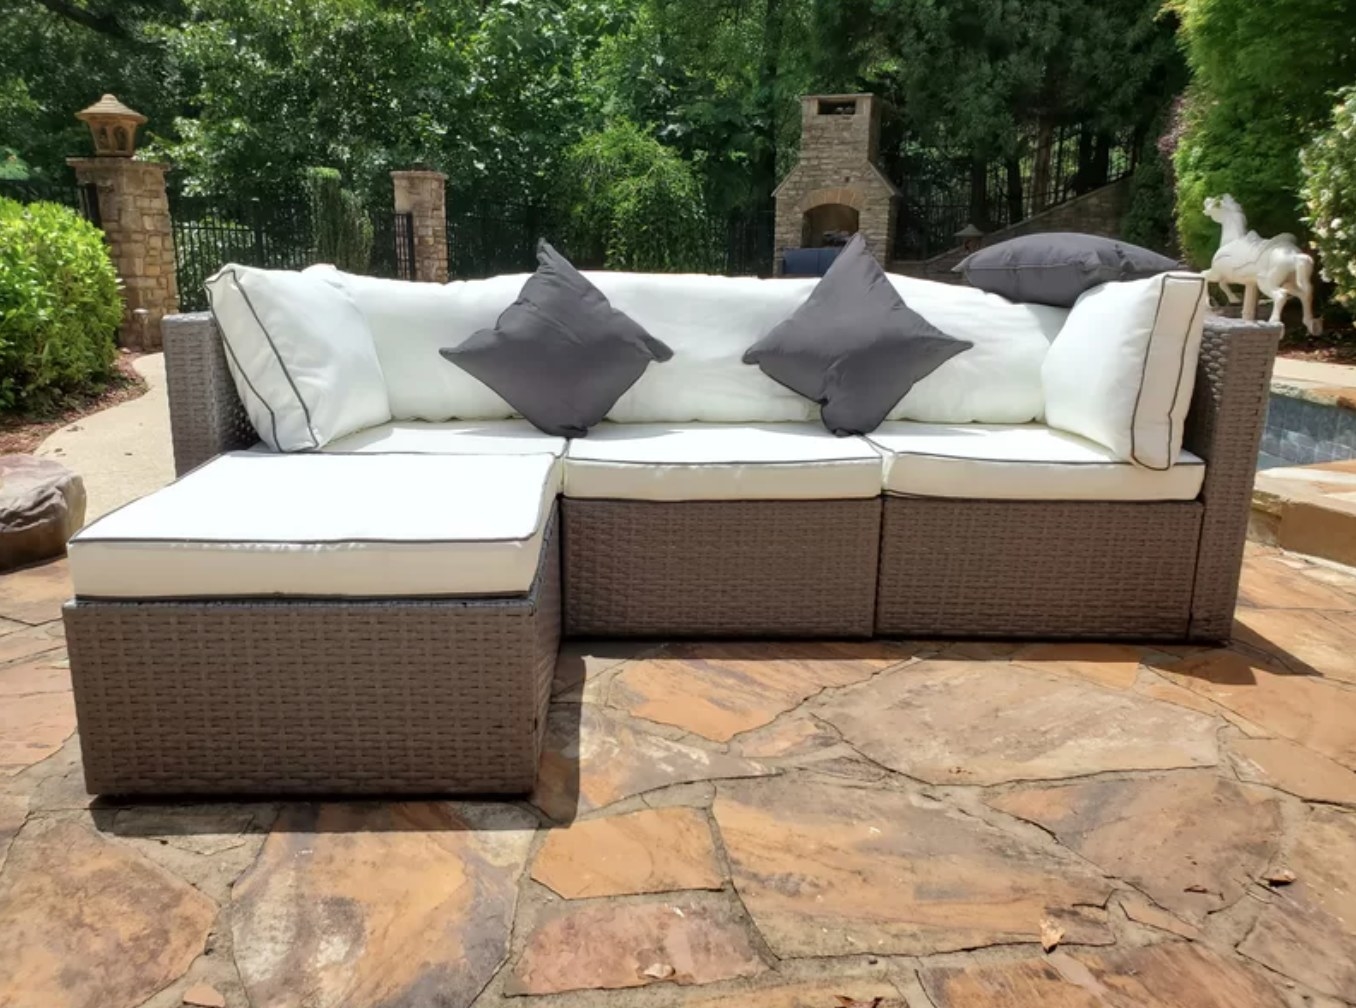 the dark wicker sofa with light cushions on a stone patio with trees in the background